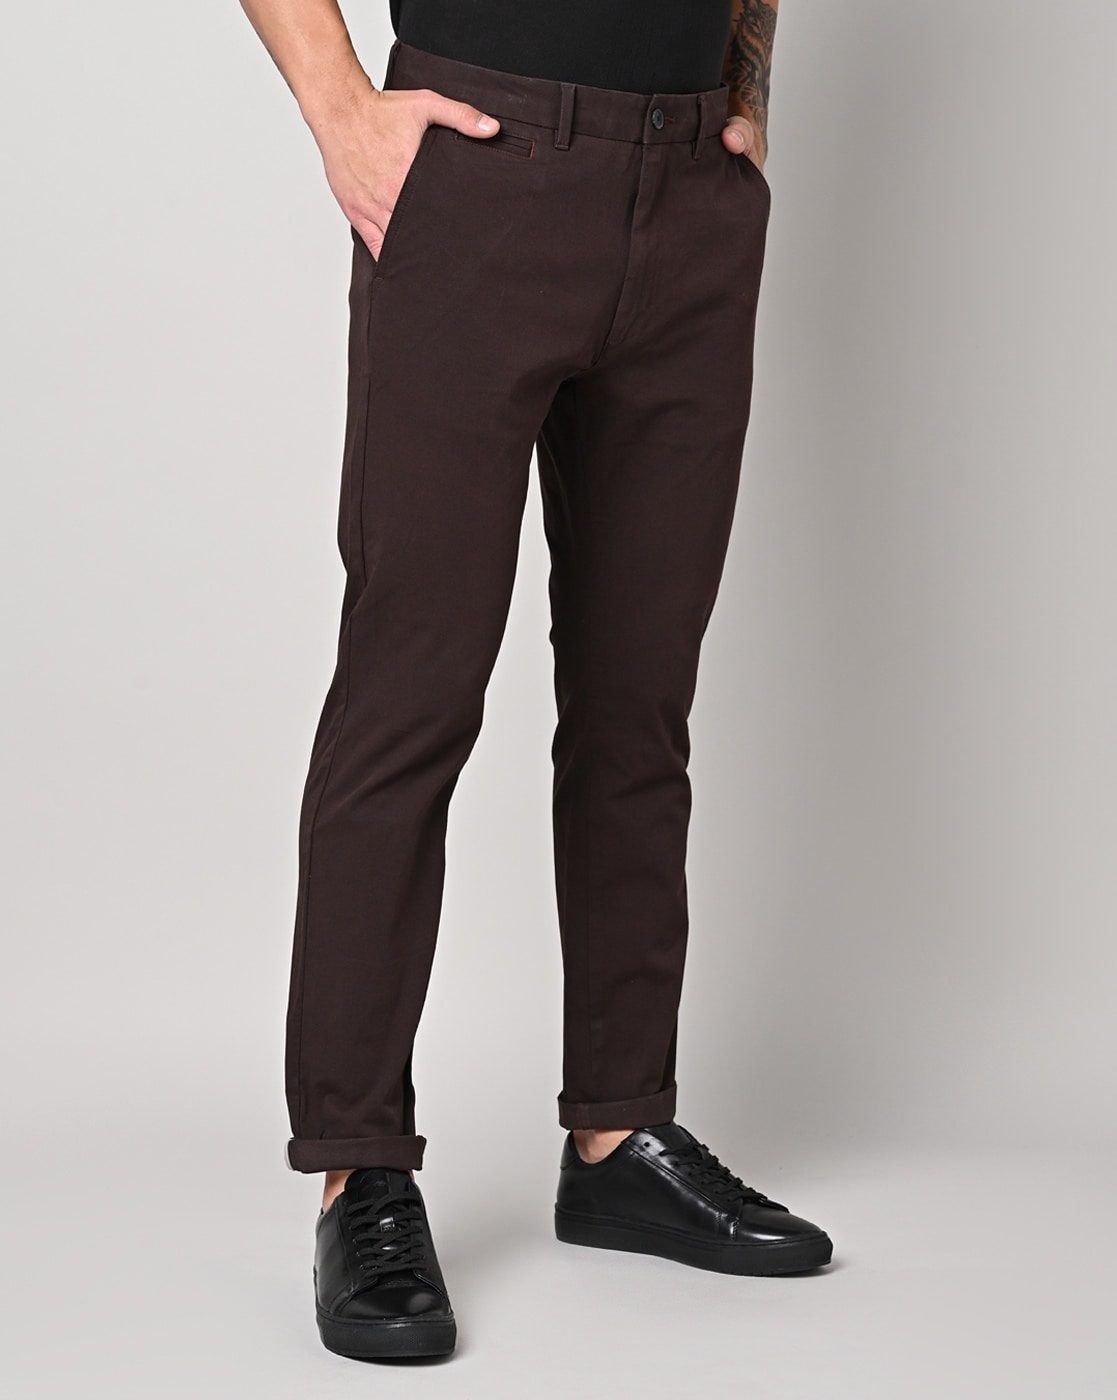 Solid Grey Chinos Stretchable Trousers, Slim Fit at Rs 999/piece in  Bengaluru